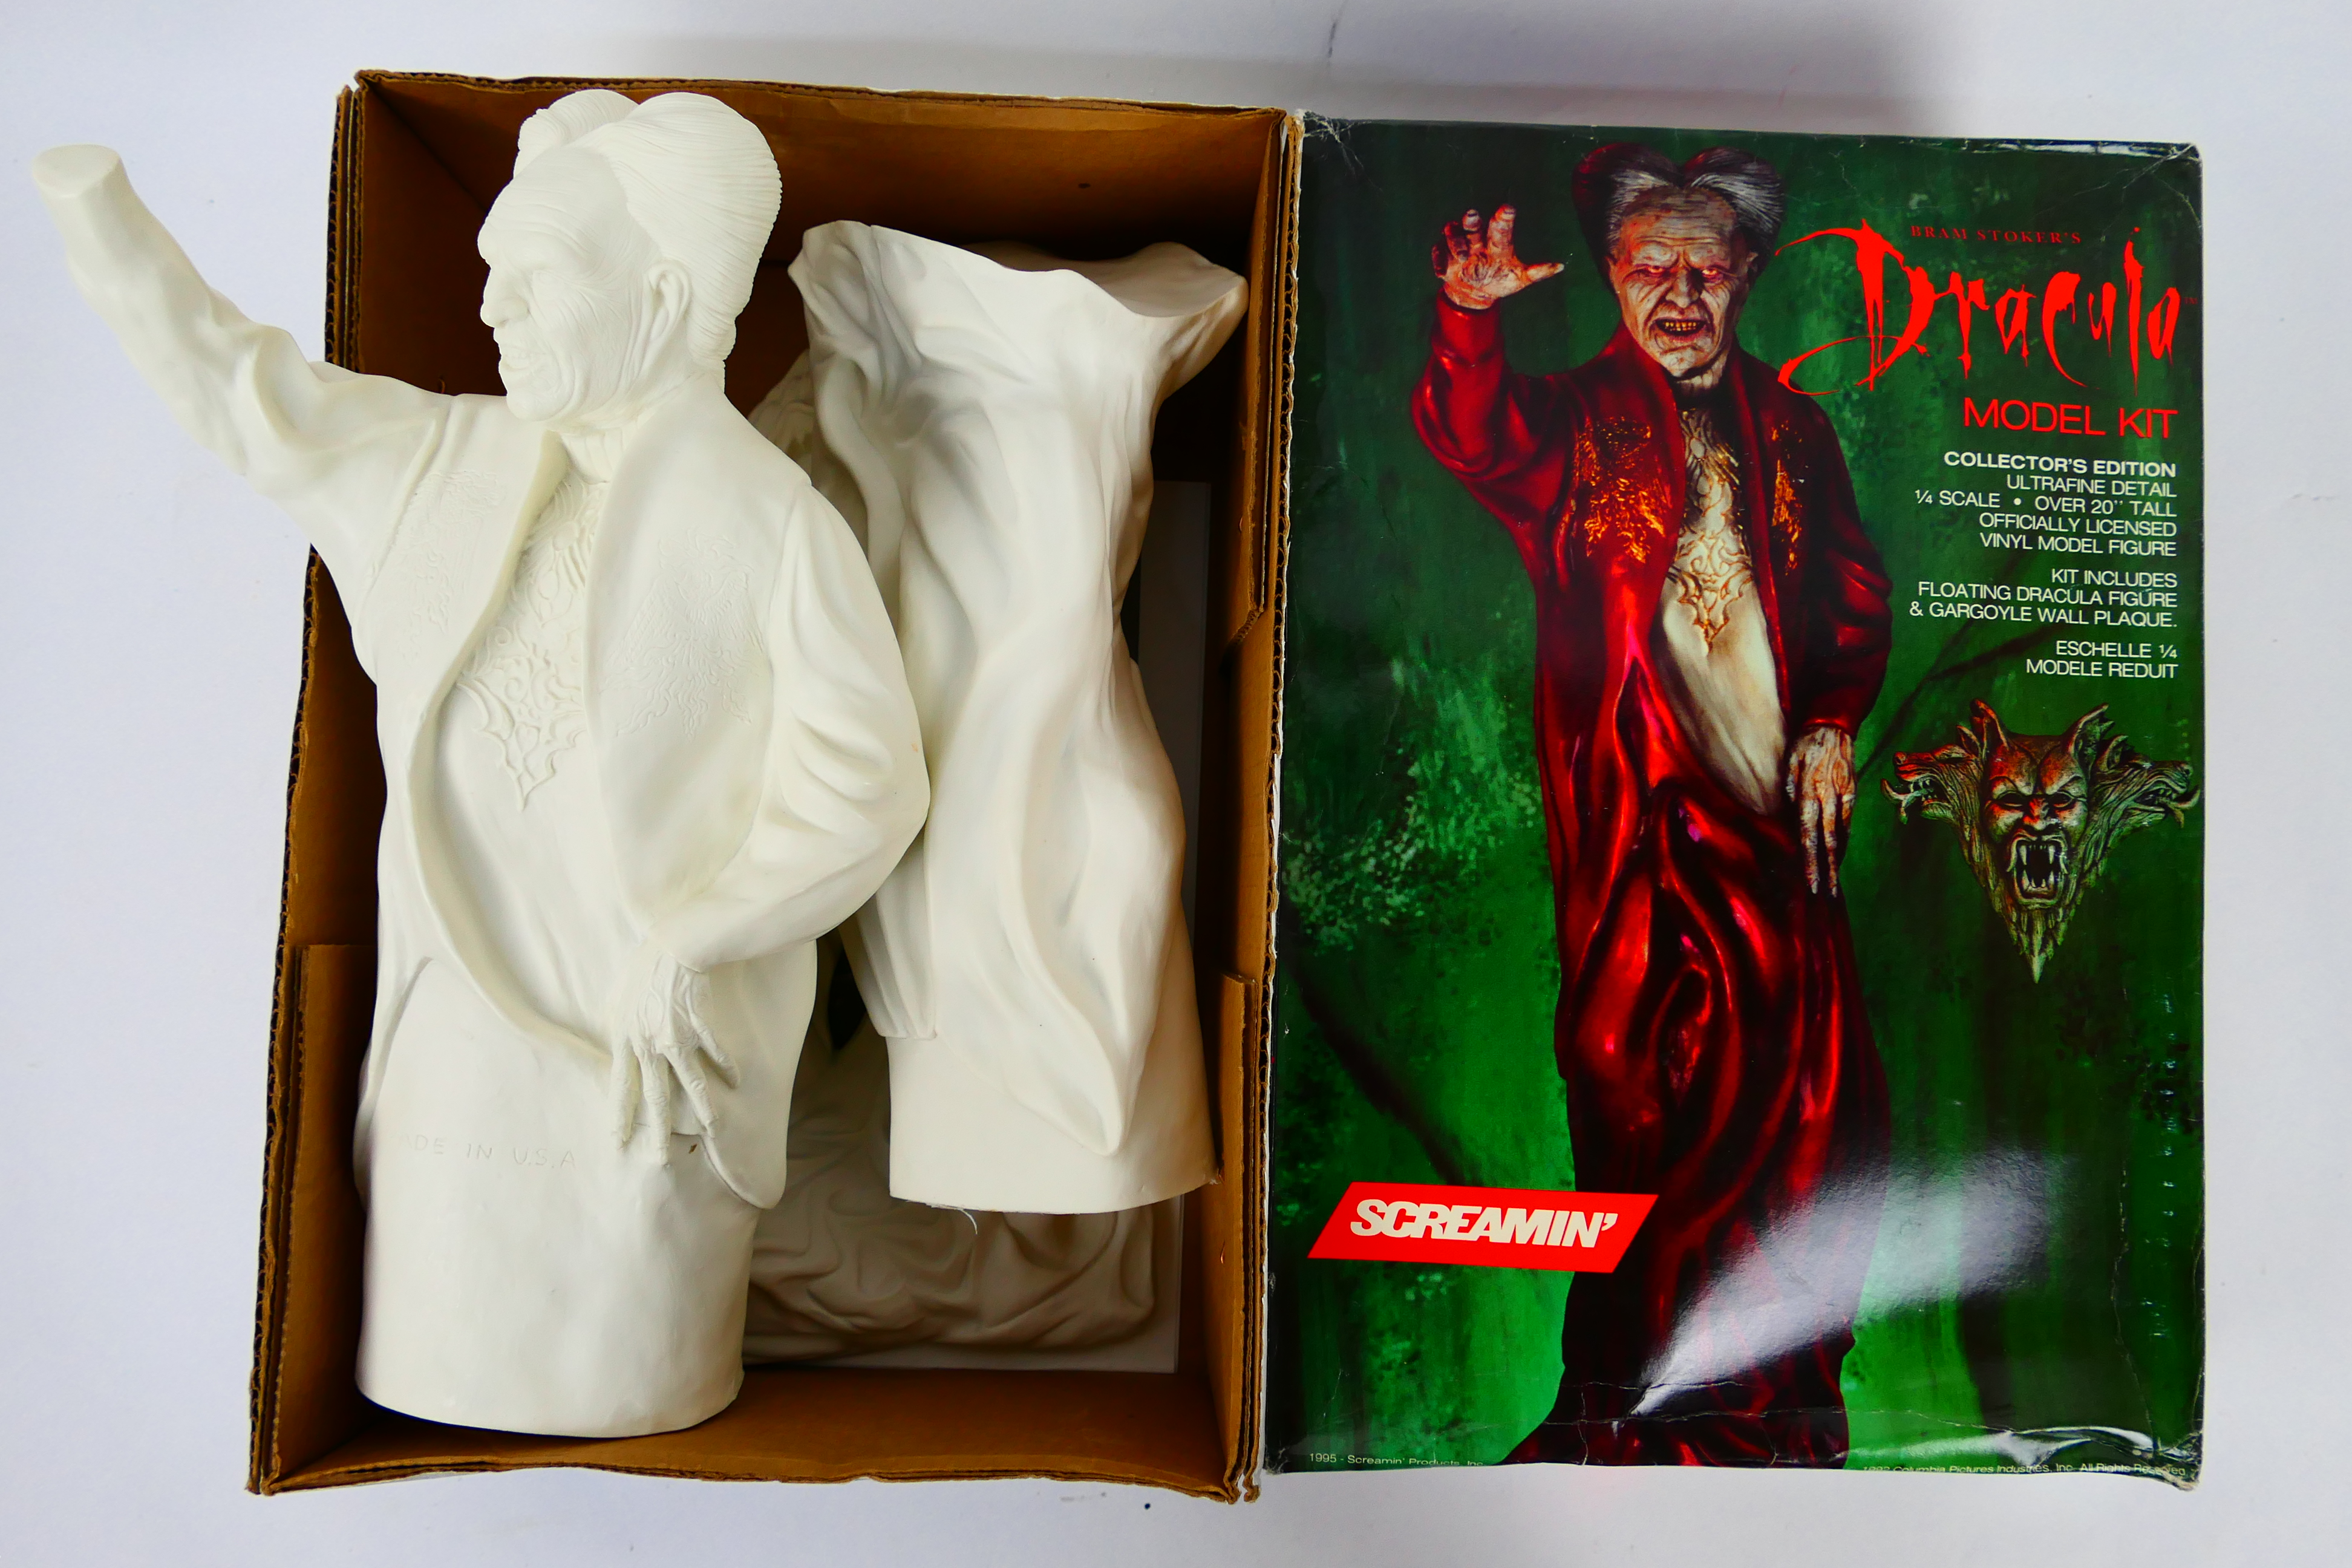 Screamin - A boxed Collectors Edition 1/4 scale vinyl Bram Stoker's 'Dracula' model kit.